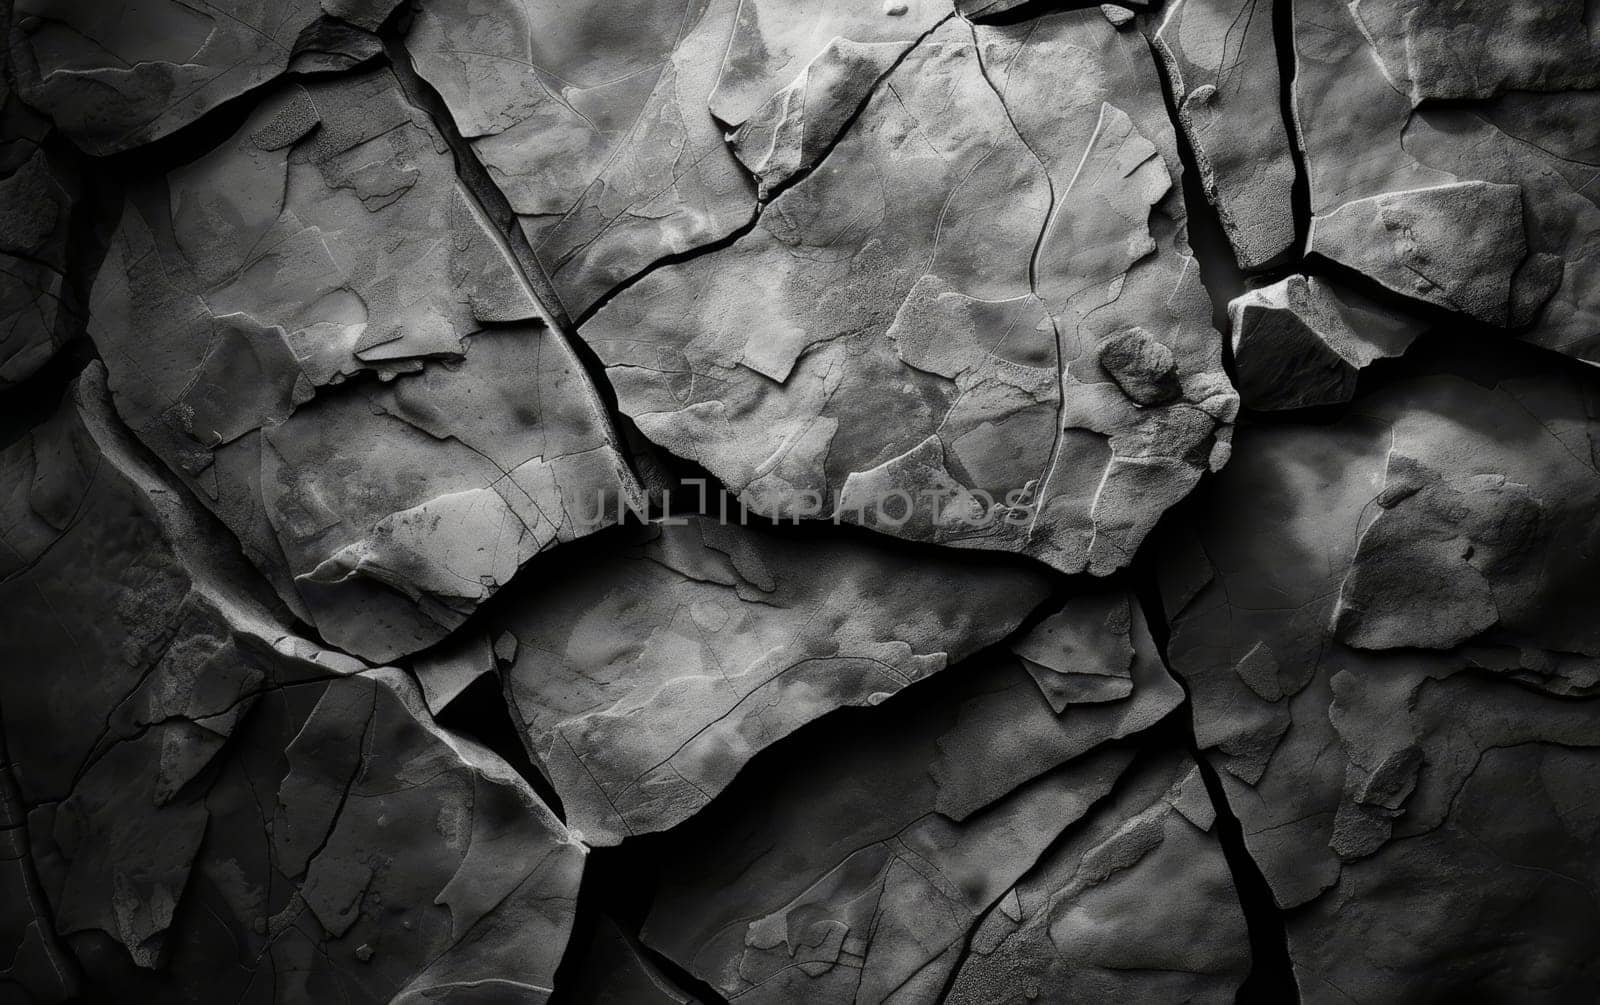 Monochrome image of a stone wall constructed with rectangular slates showing cracks and textures.